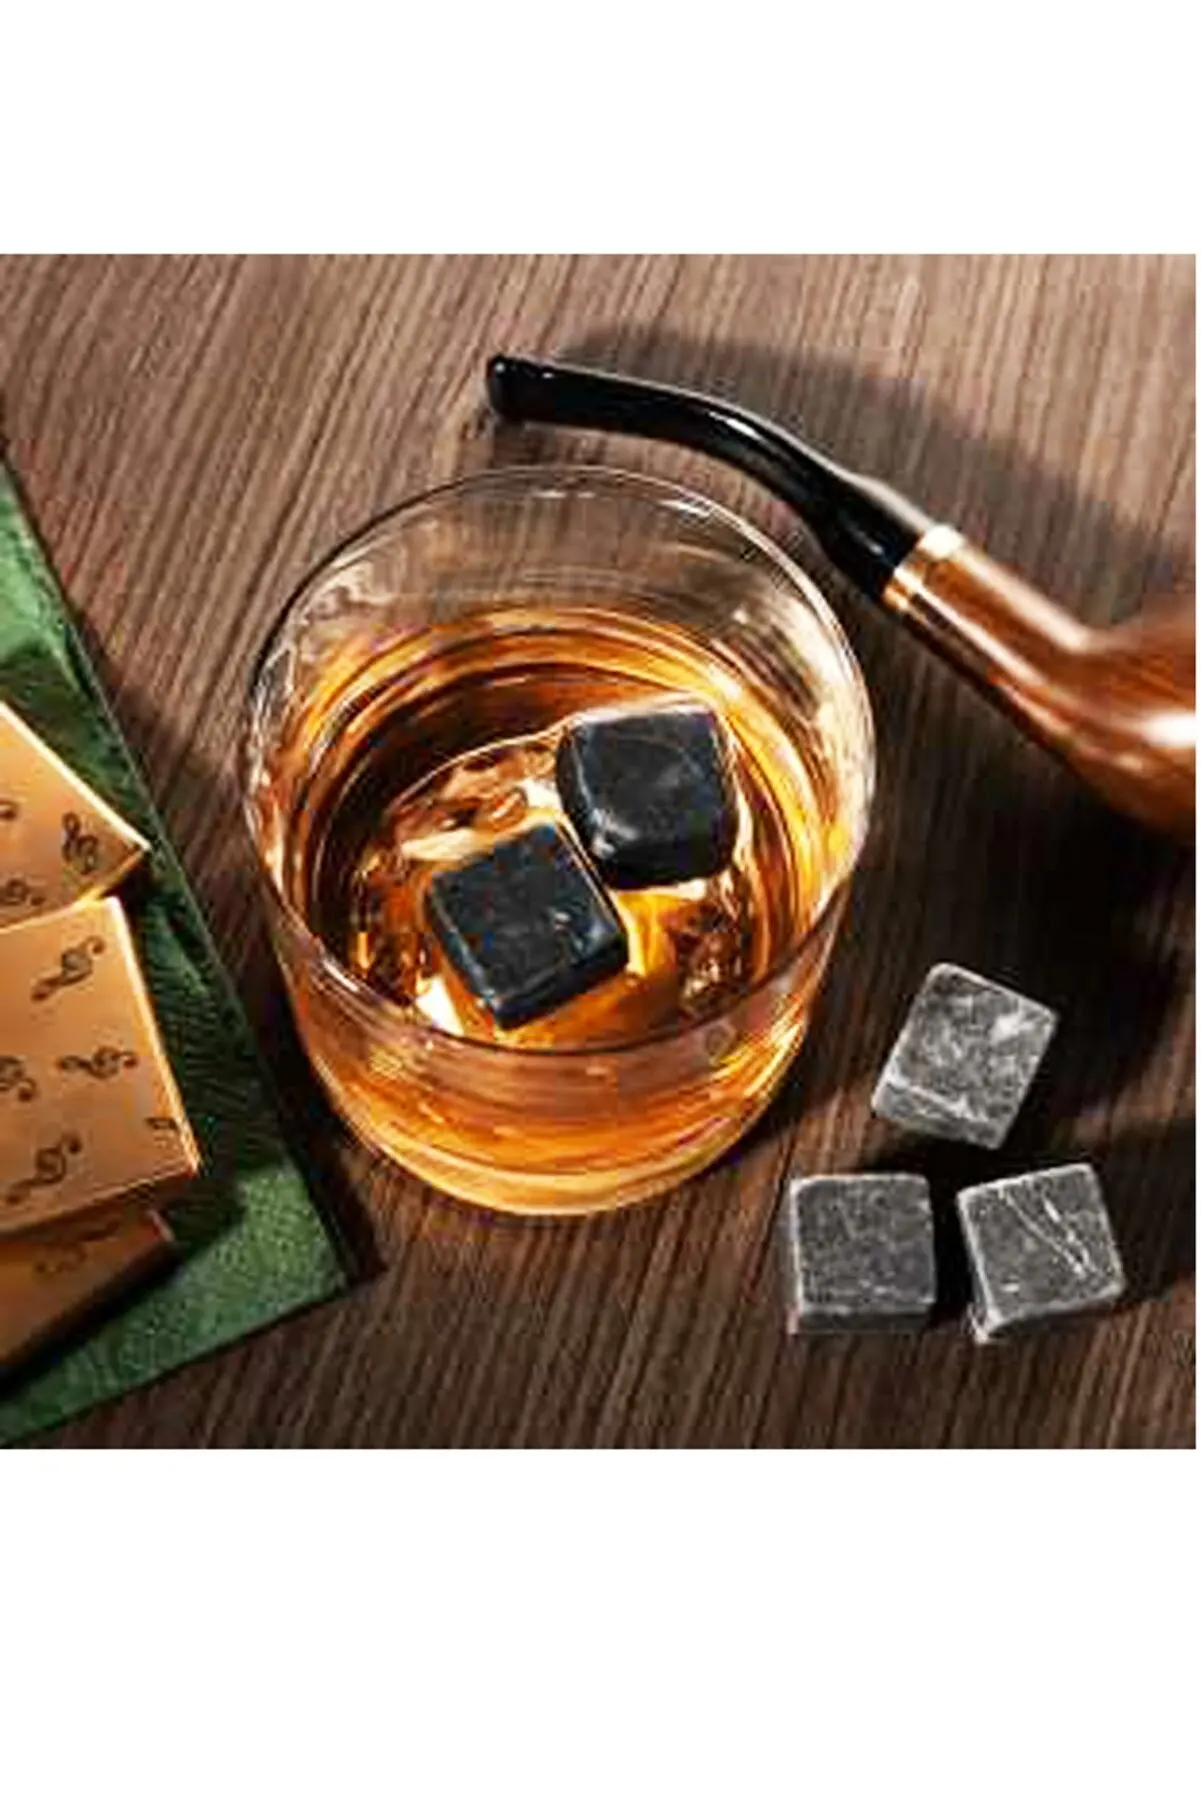 

12 Pcs Granite Pouch Whisky Stone Rock Cubes Glacier Rocks Natural Bulk Cooler For Xmas Barware Houehold Drinking Tool Gifts